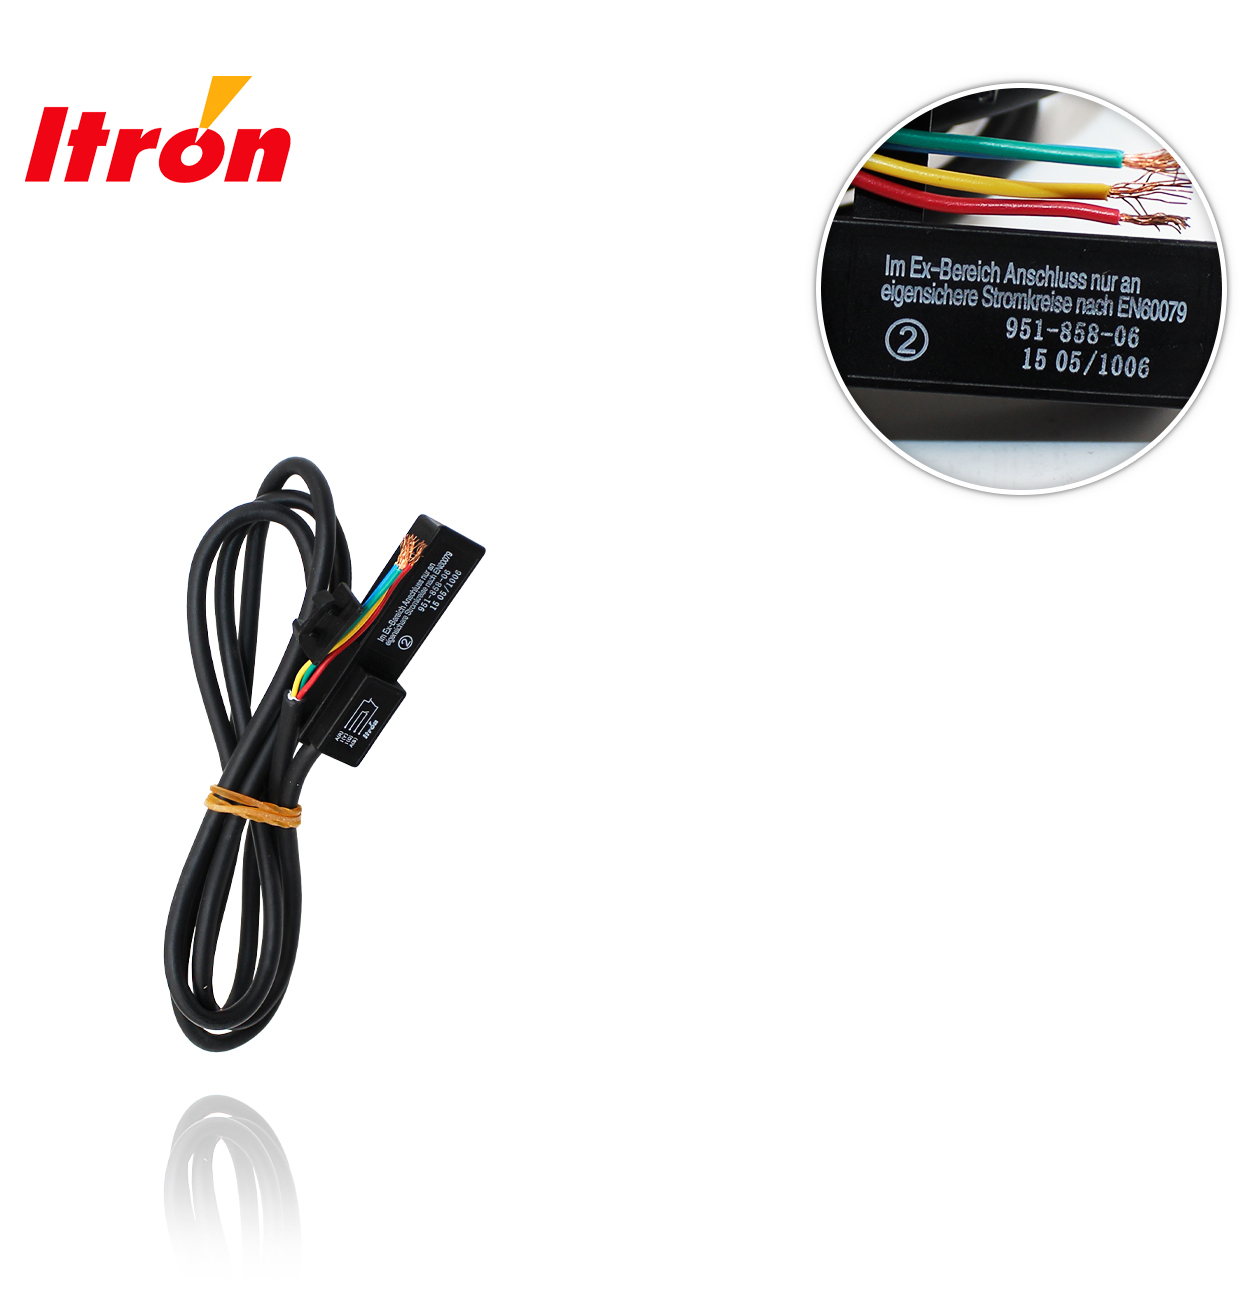 LOW-FREQUENCY (LF) PULSE EMITTER FOR G6 A G100 MEMBRANE METER WITH 4-WIRE ITRON CONNECTION CABLE